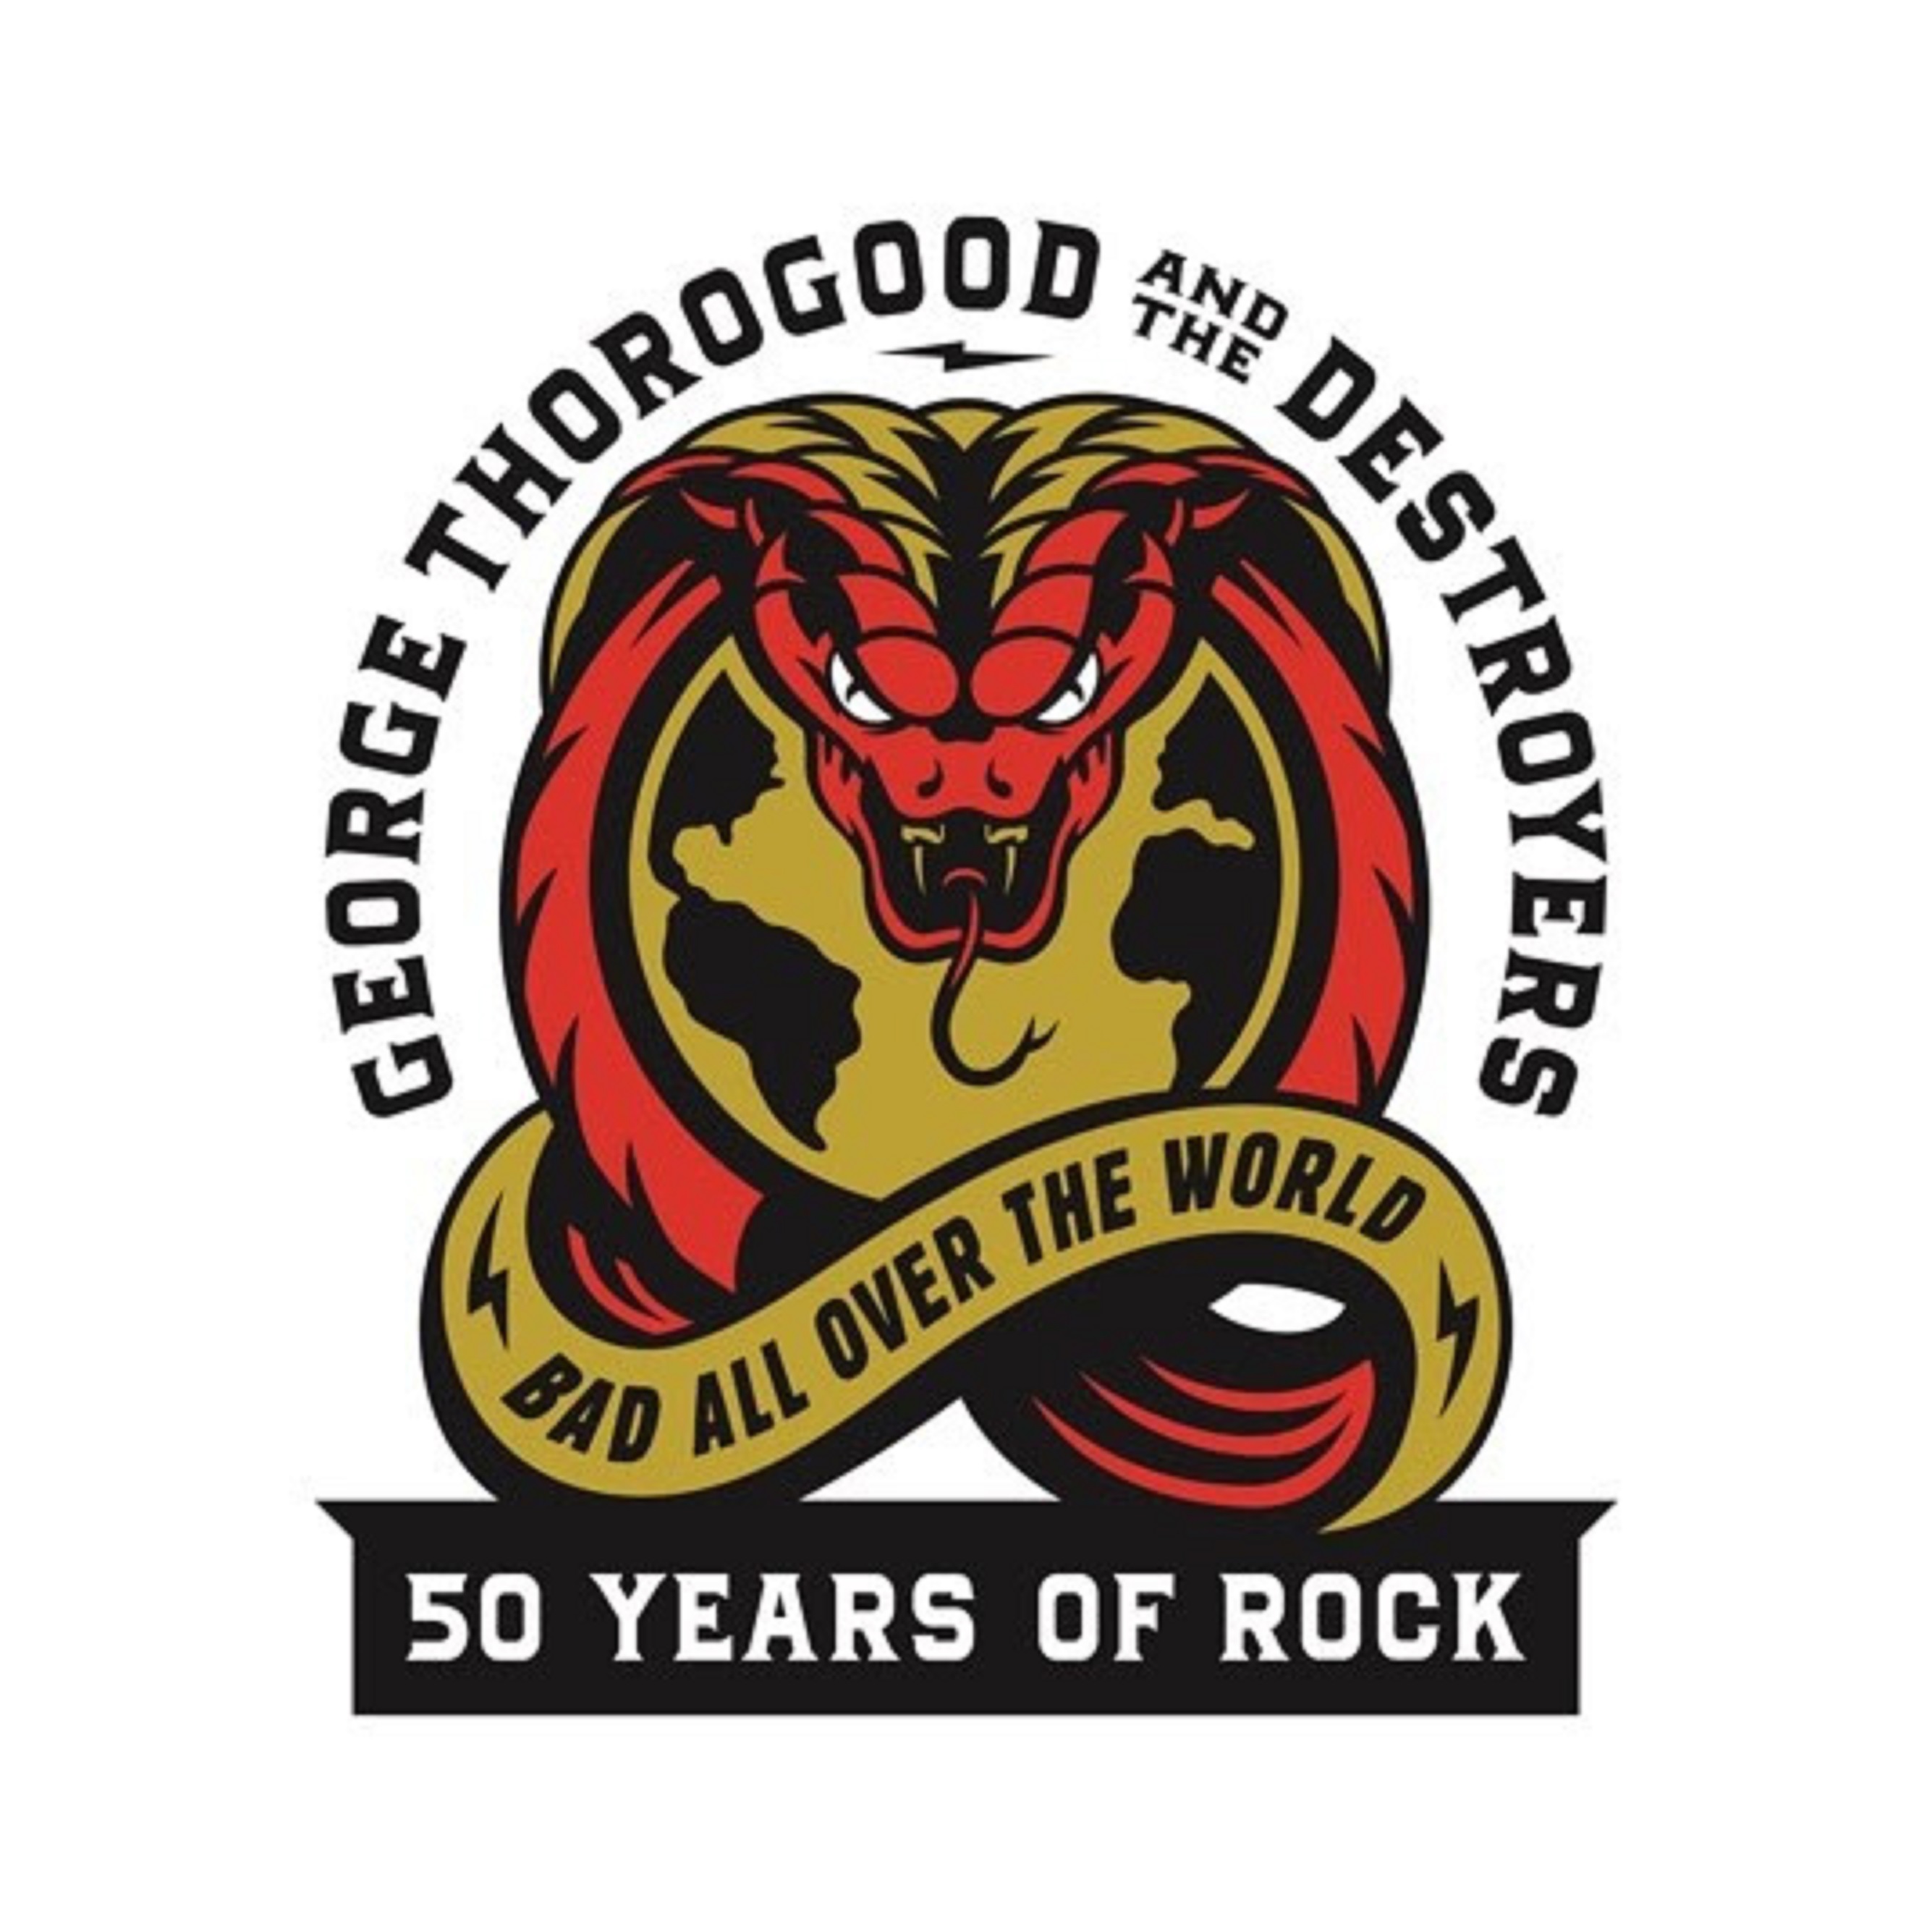 GEORGE THOROGOOD & THE DESTROYERS ANNOUNCE 50TH ANNIVERSARY TOUR FOR 2023